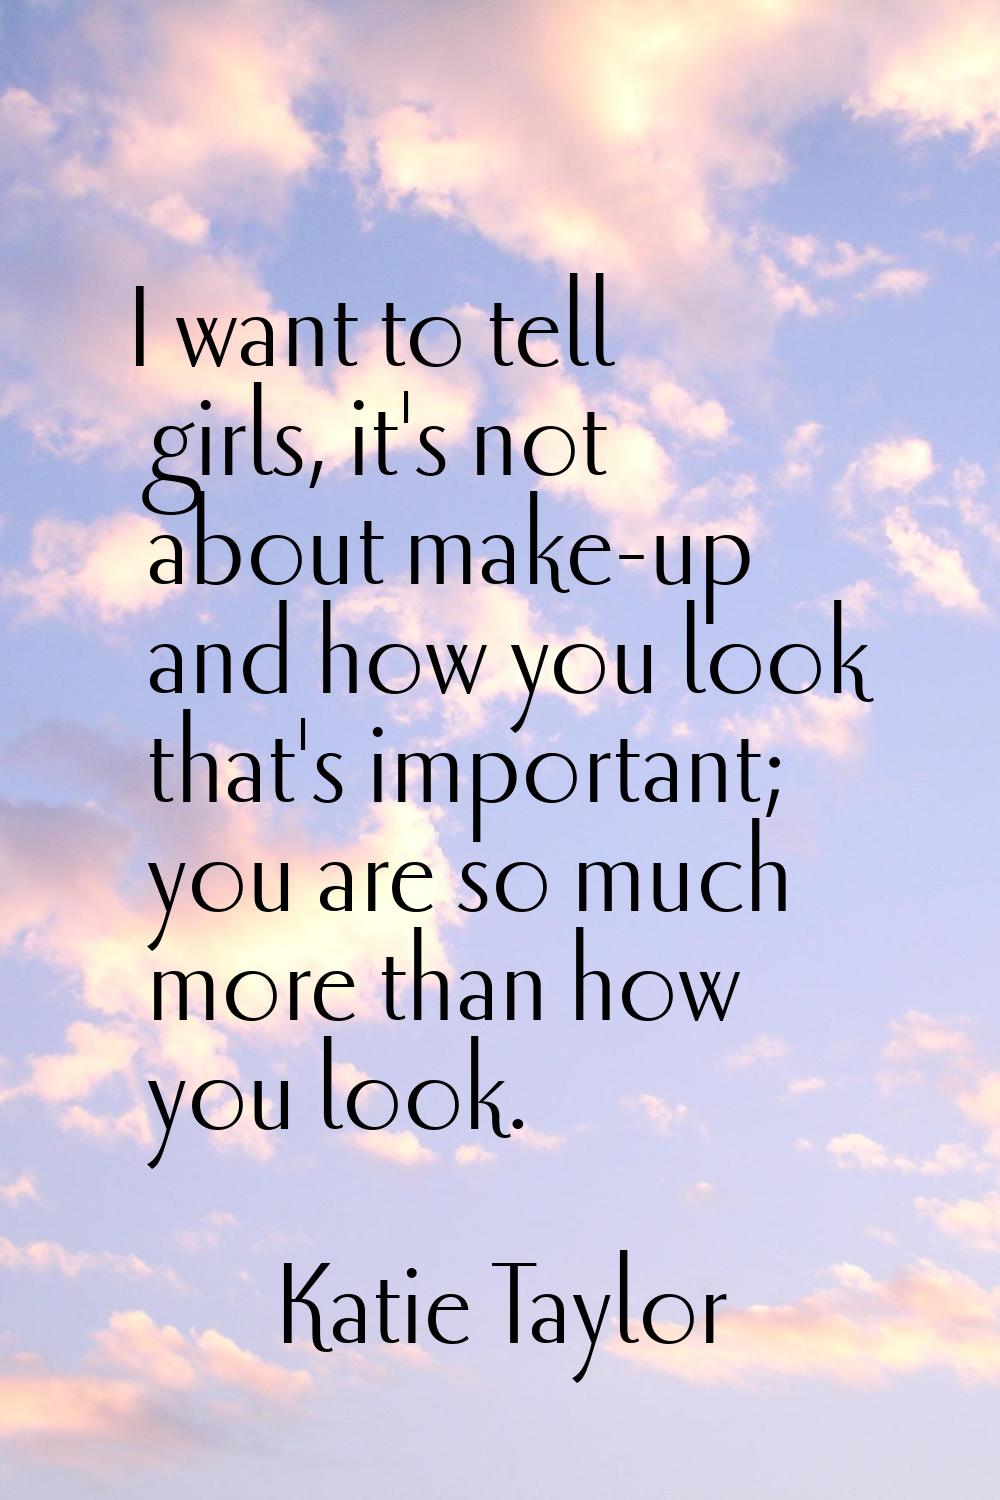 I want to tell girls, it's not about make-up and how you look that's important; you are so much mor